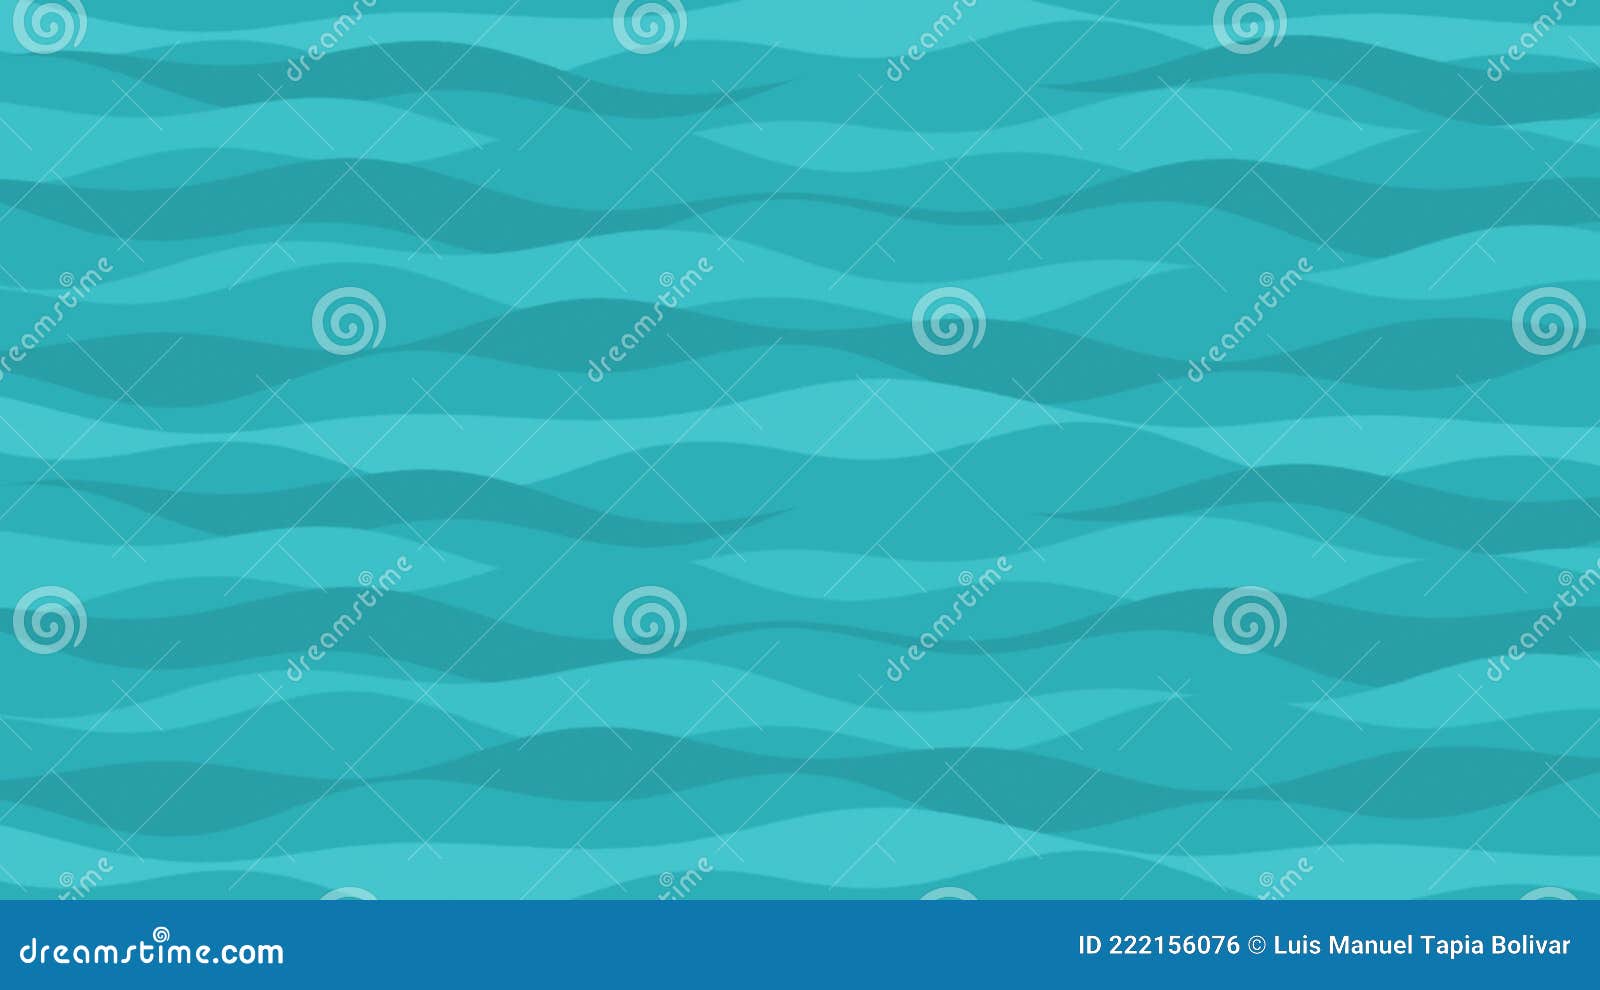 Sea Waves Animation with Flat Design Stock Footage - Video of blue,  papercraft: 222156076